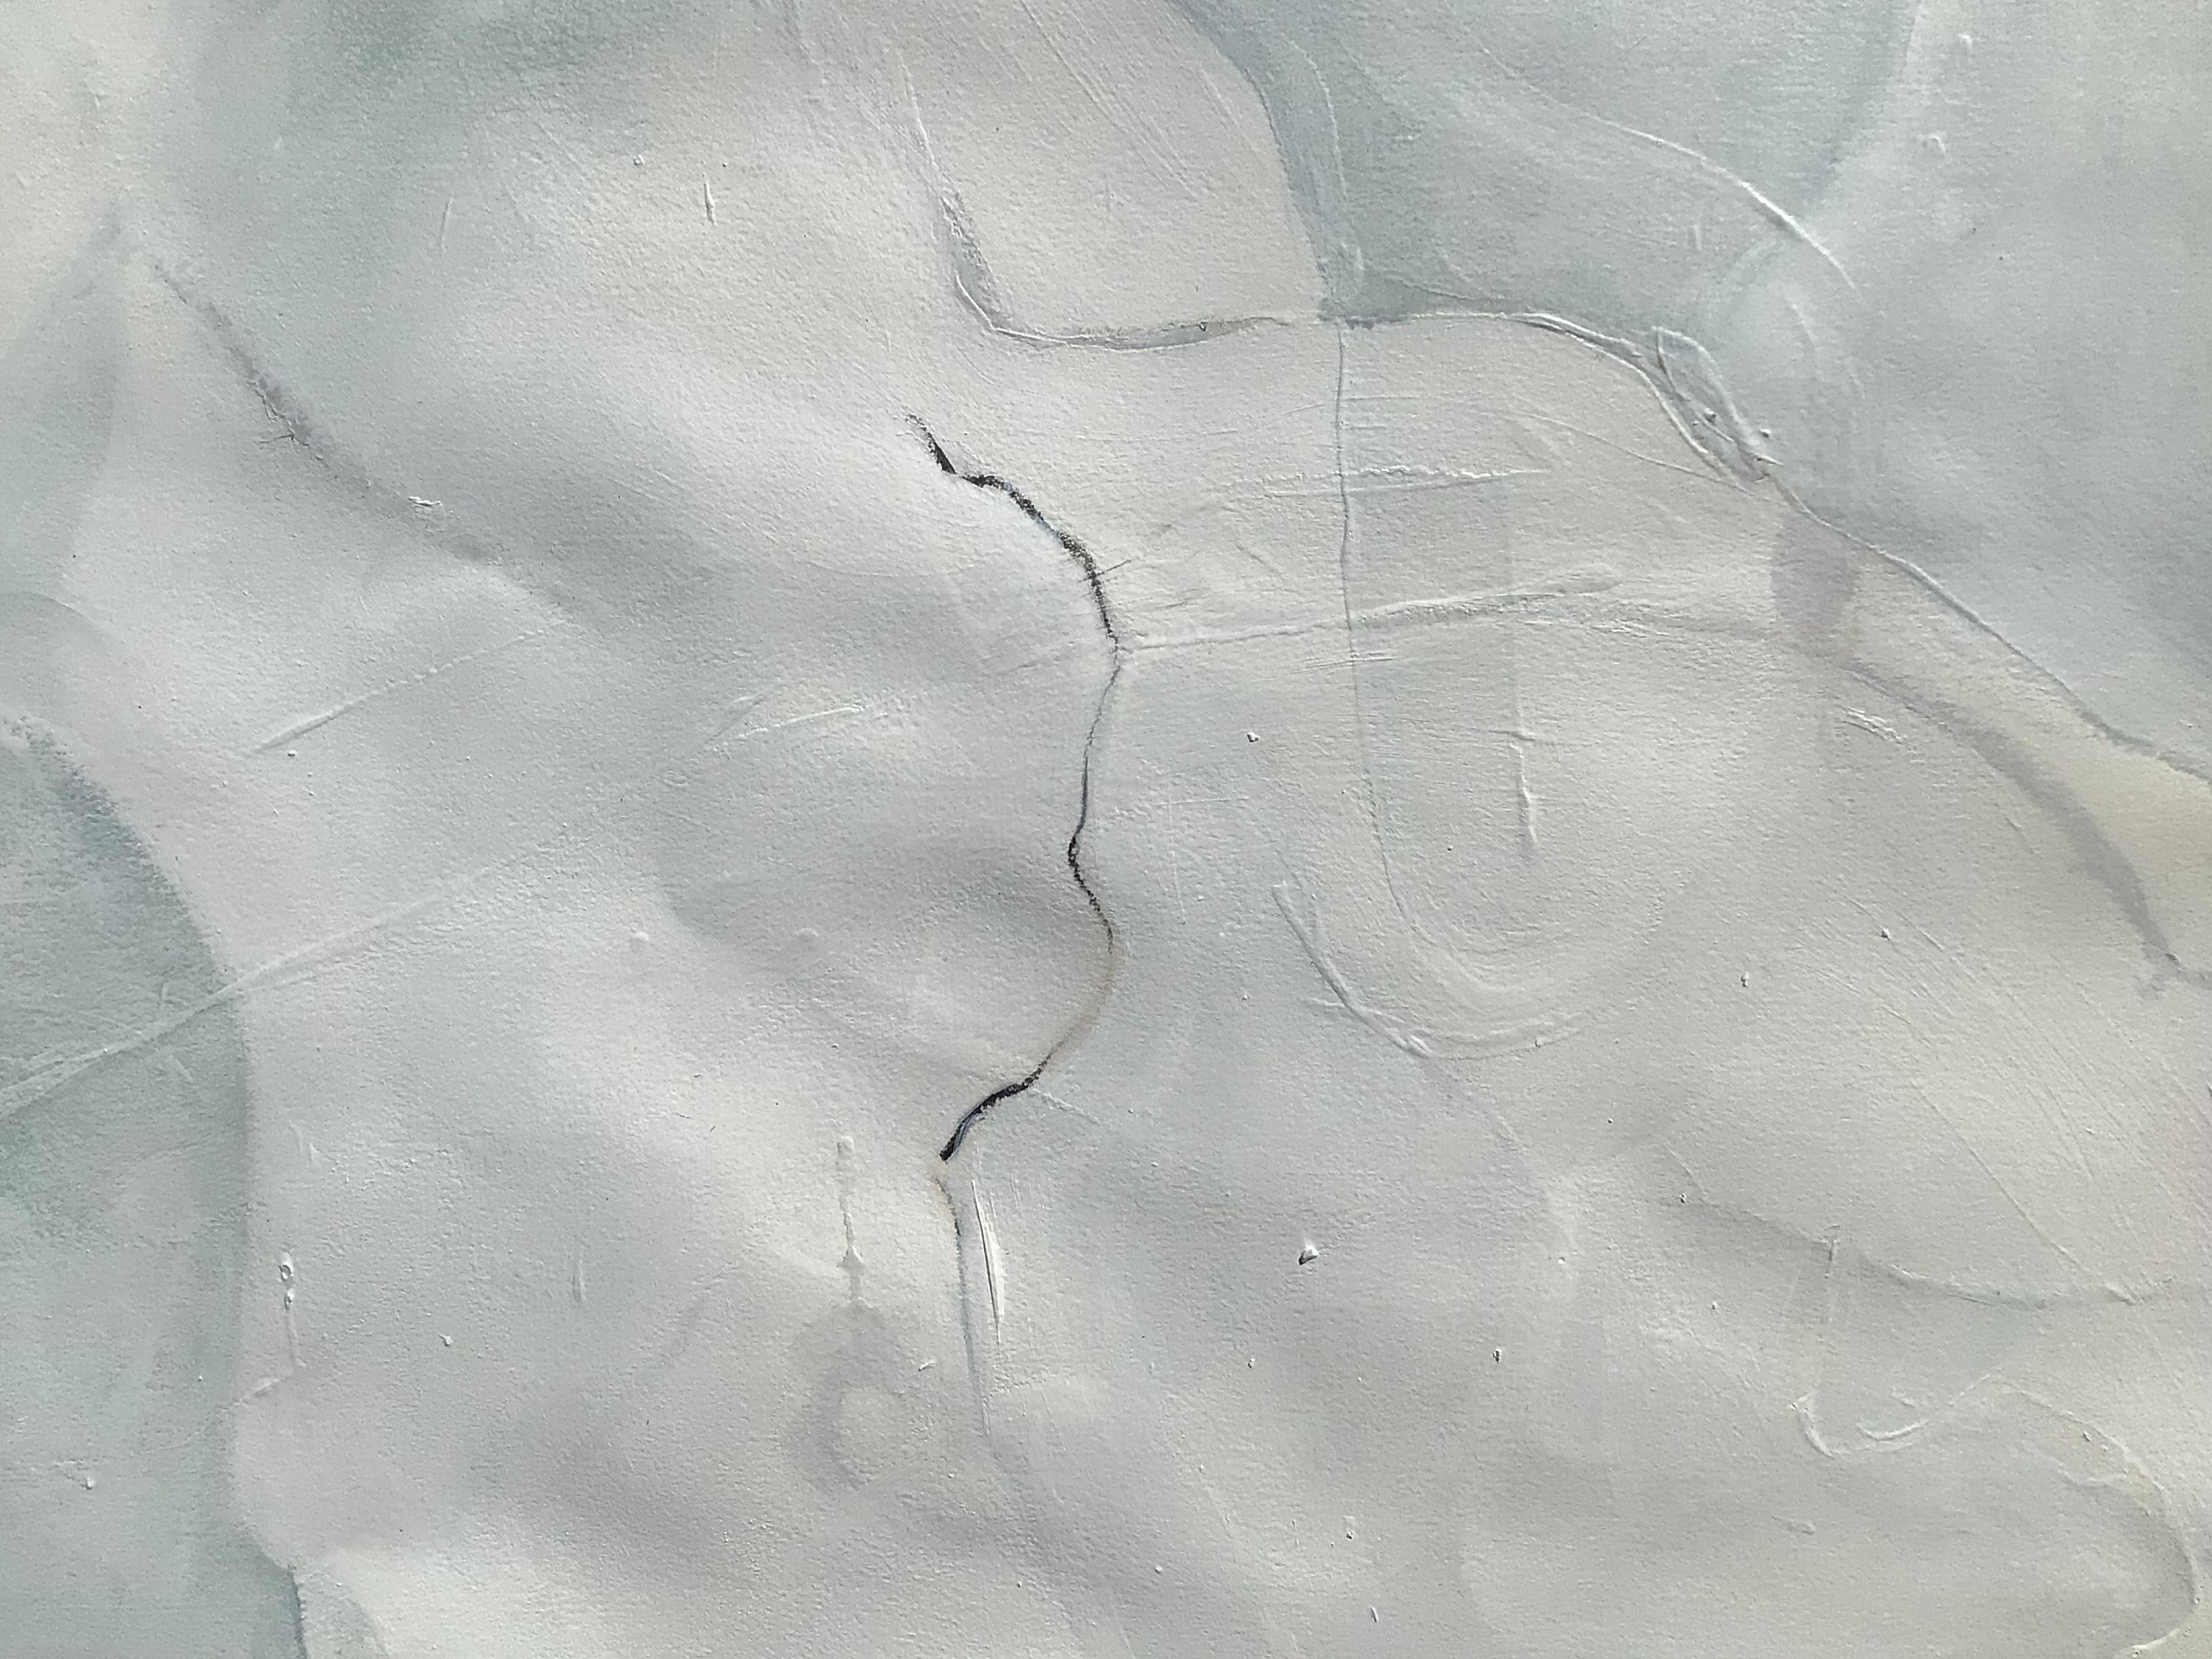 Abstract mixed medium painting on paper. 
- Original one of a kind artwork
- Artist Signature on back
- Certificate of Authenticity provided
Beautiful abstract organic shapes are monochromatic, ethereal paintings on paper. A calming, pale palette of